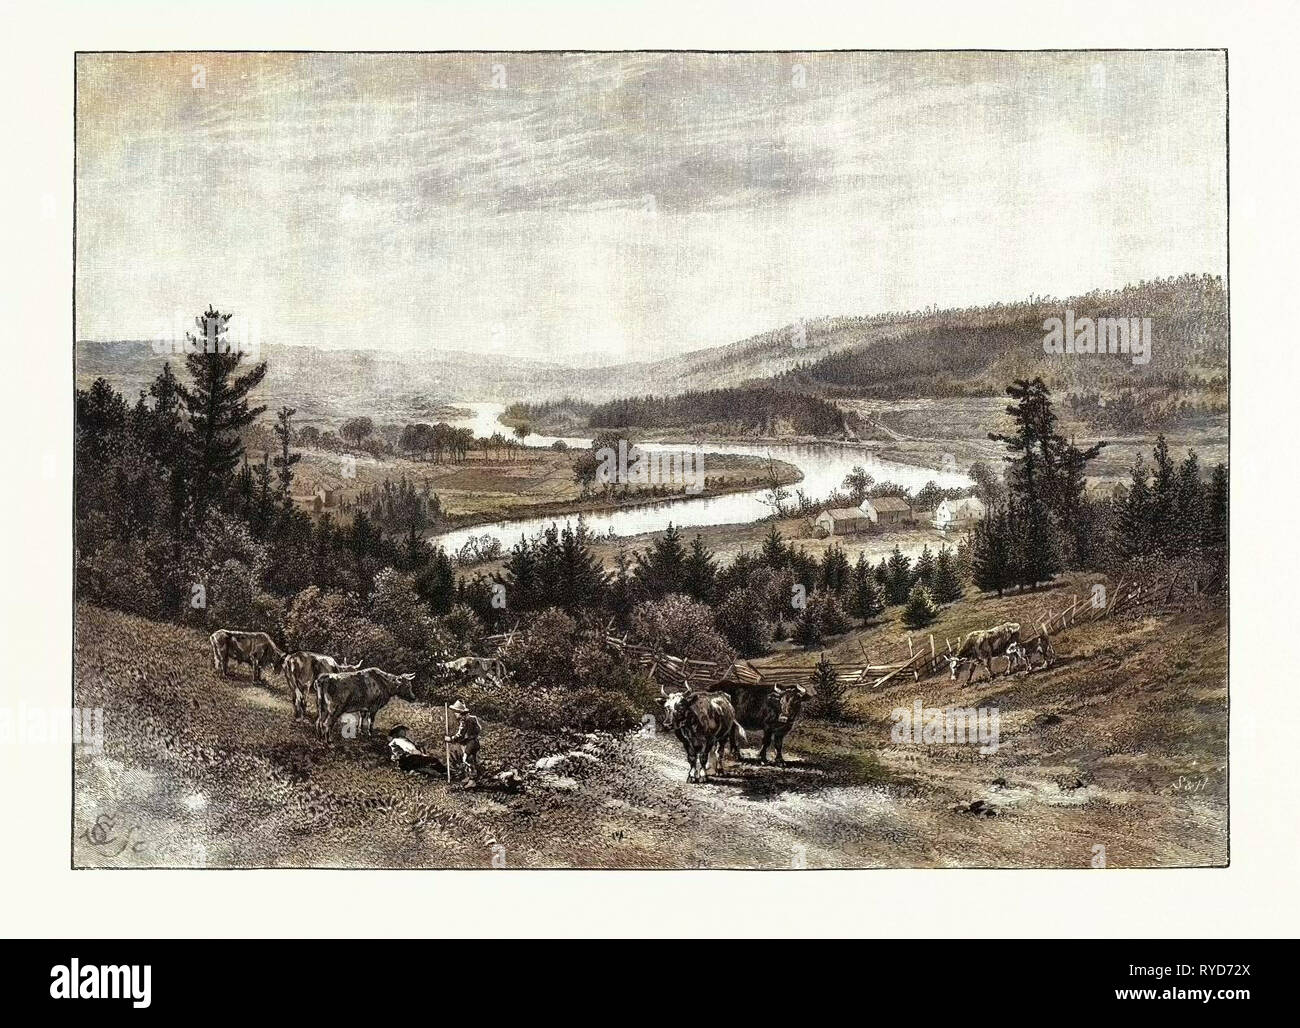 Junction of the Nashwaak and Tay, Canada, Nineteenth Century Engraving Stock Photo